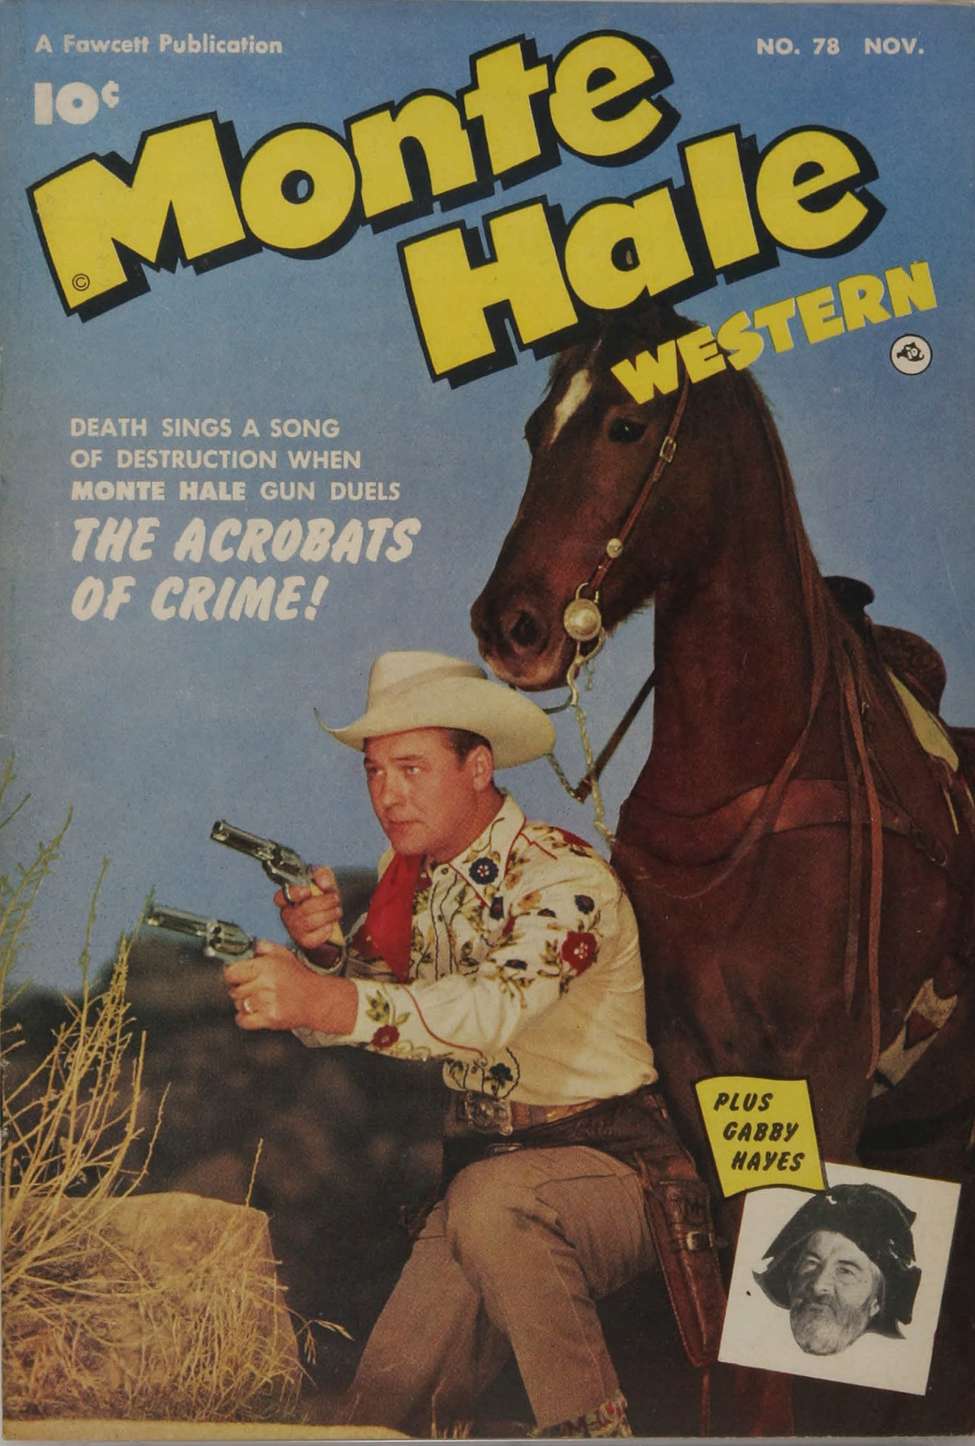 Book Cover For Monte Hale Western 78